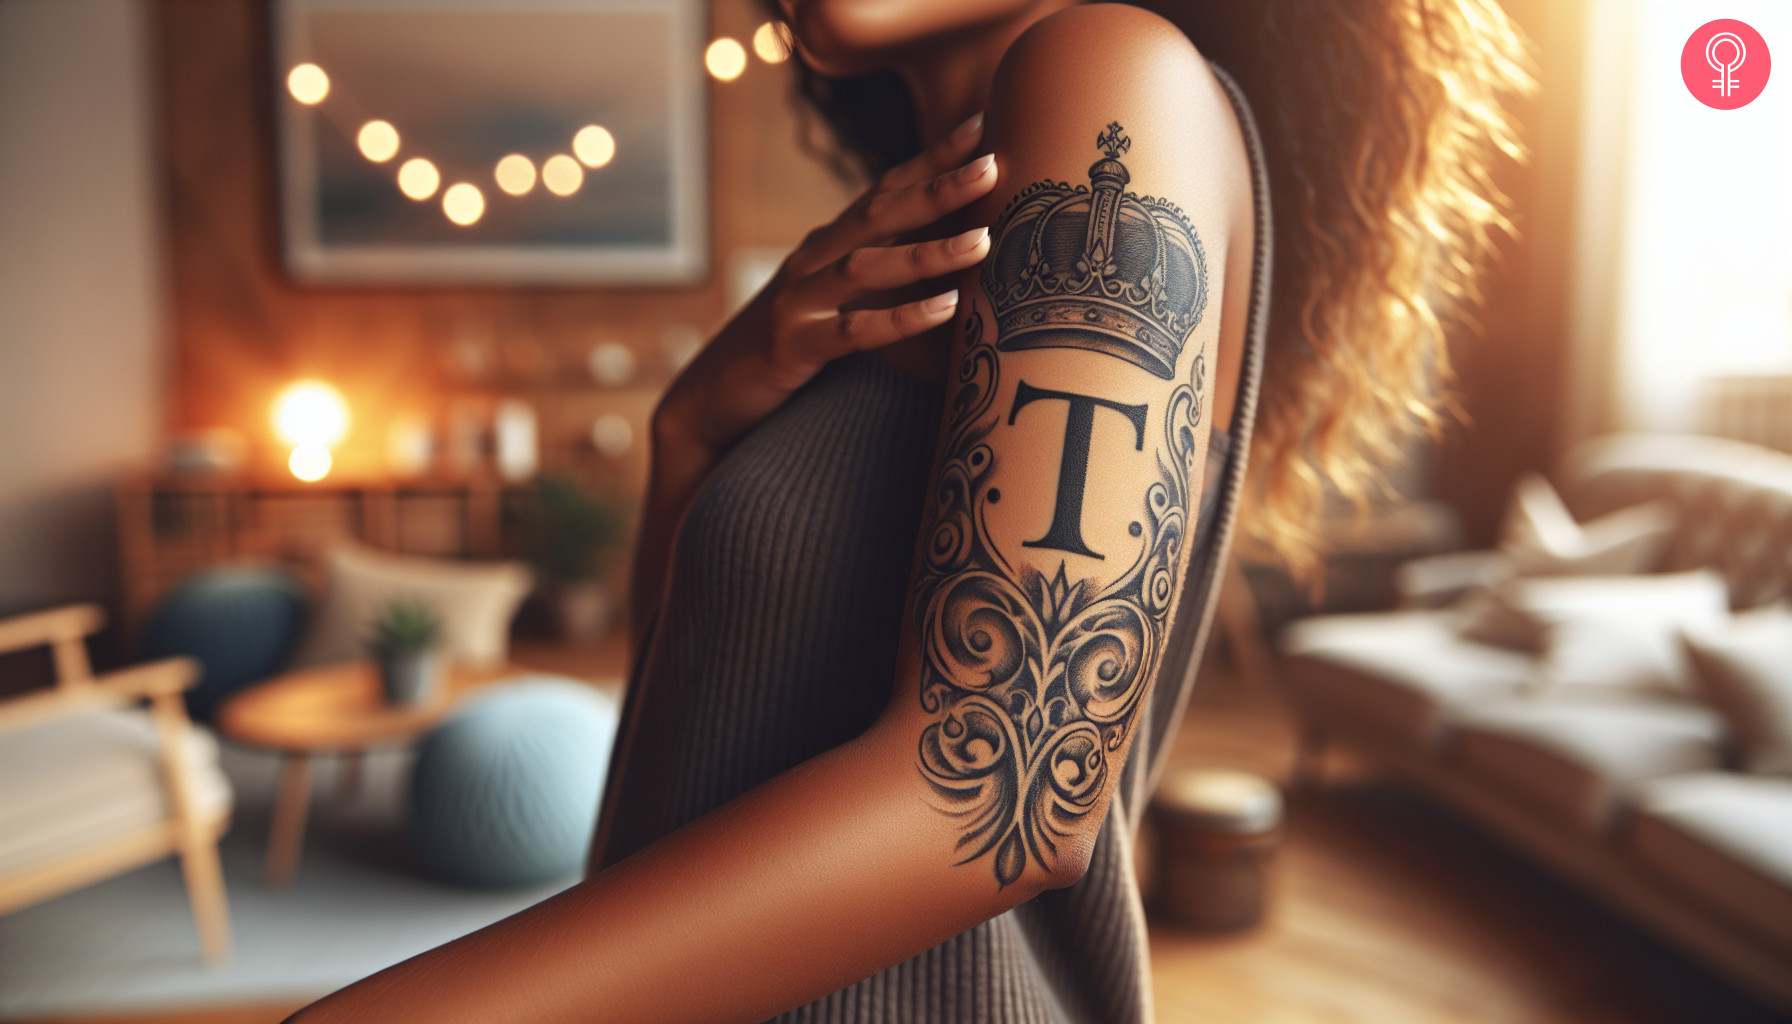 A letter T tattoo with a crown on a woman’s upper arm